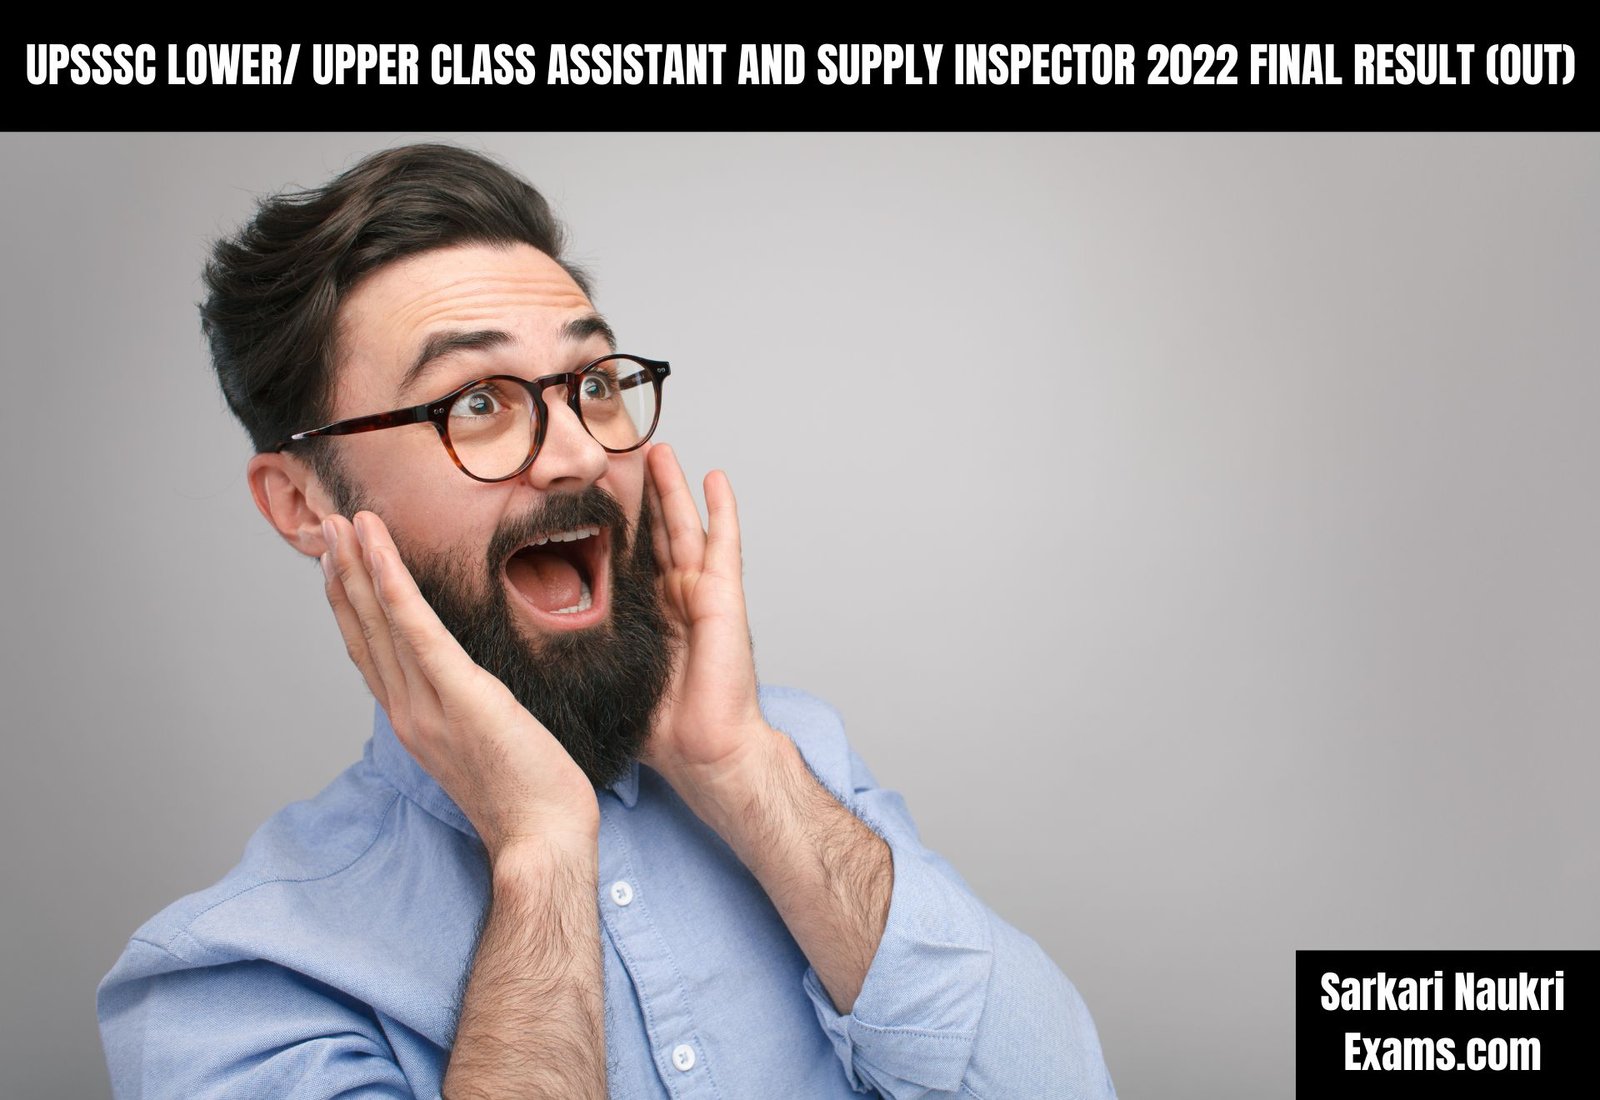 UPSSSC Lower/ Upper Class Assistant and Supply Inspector 2022 Final Result (OUT)